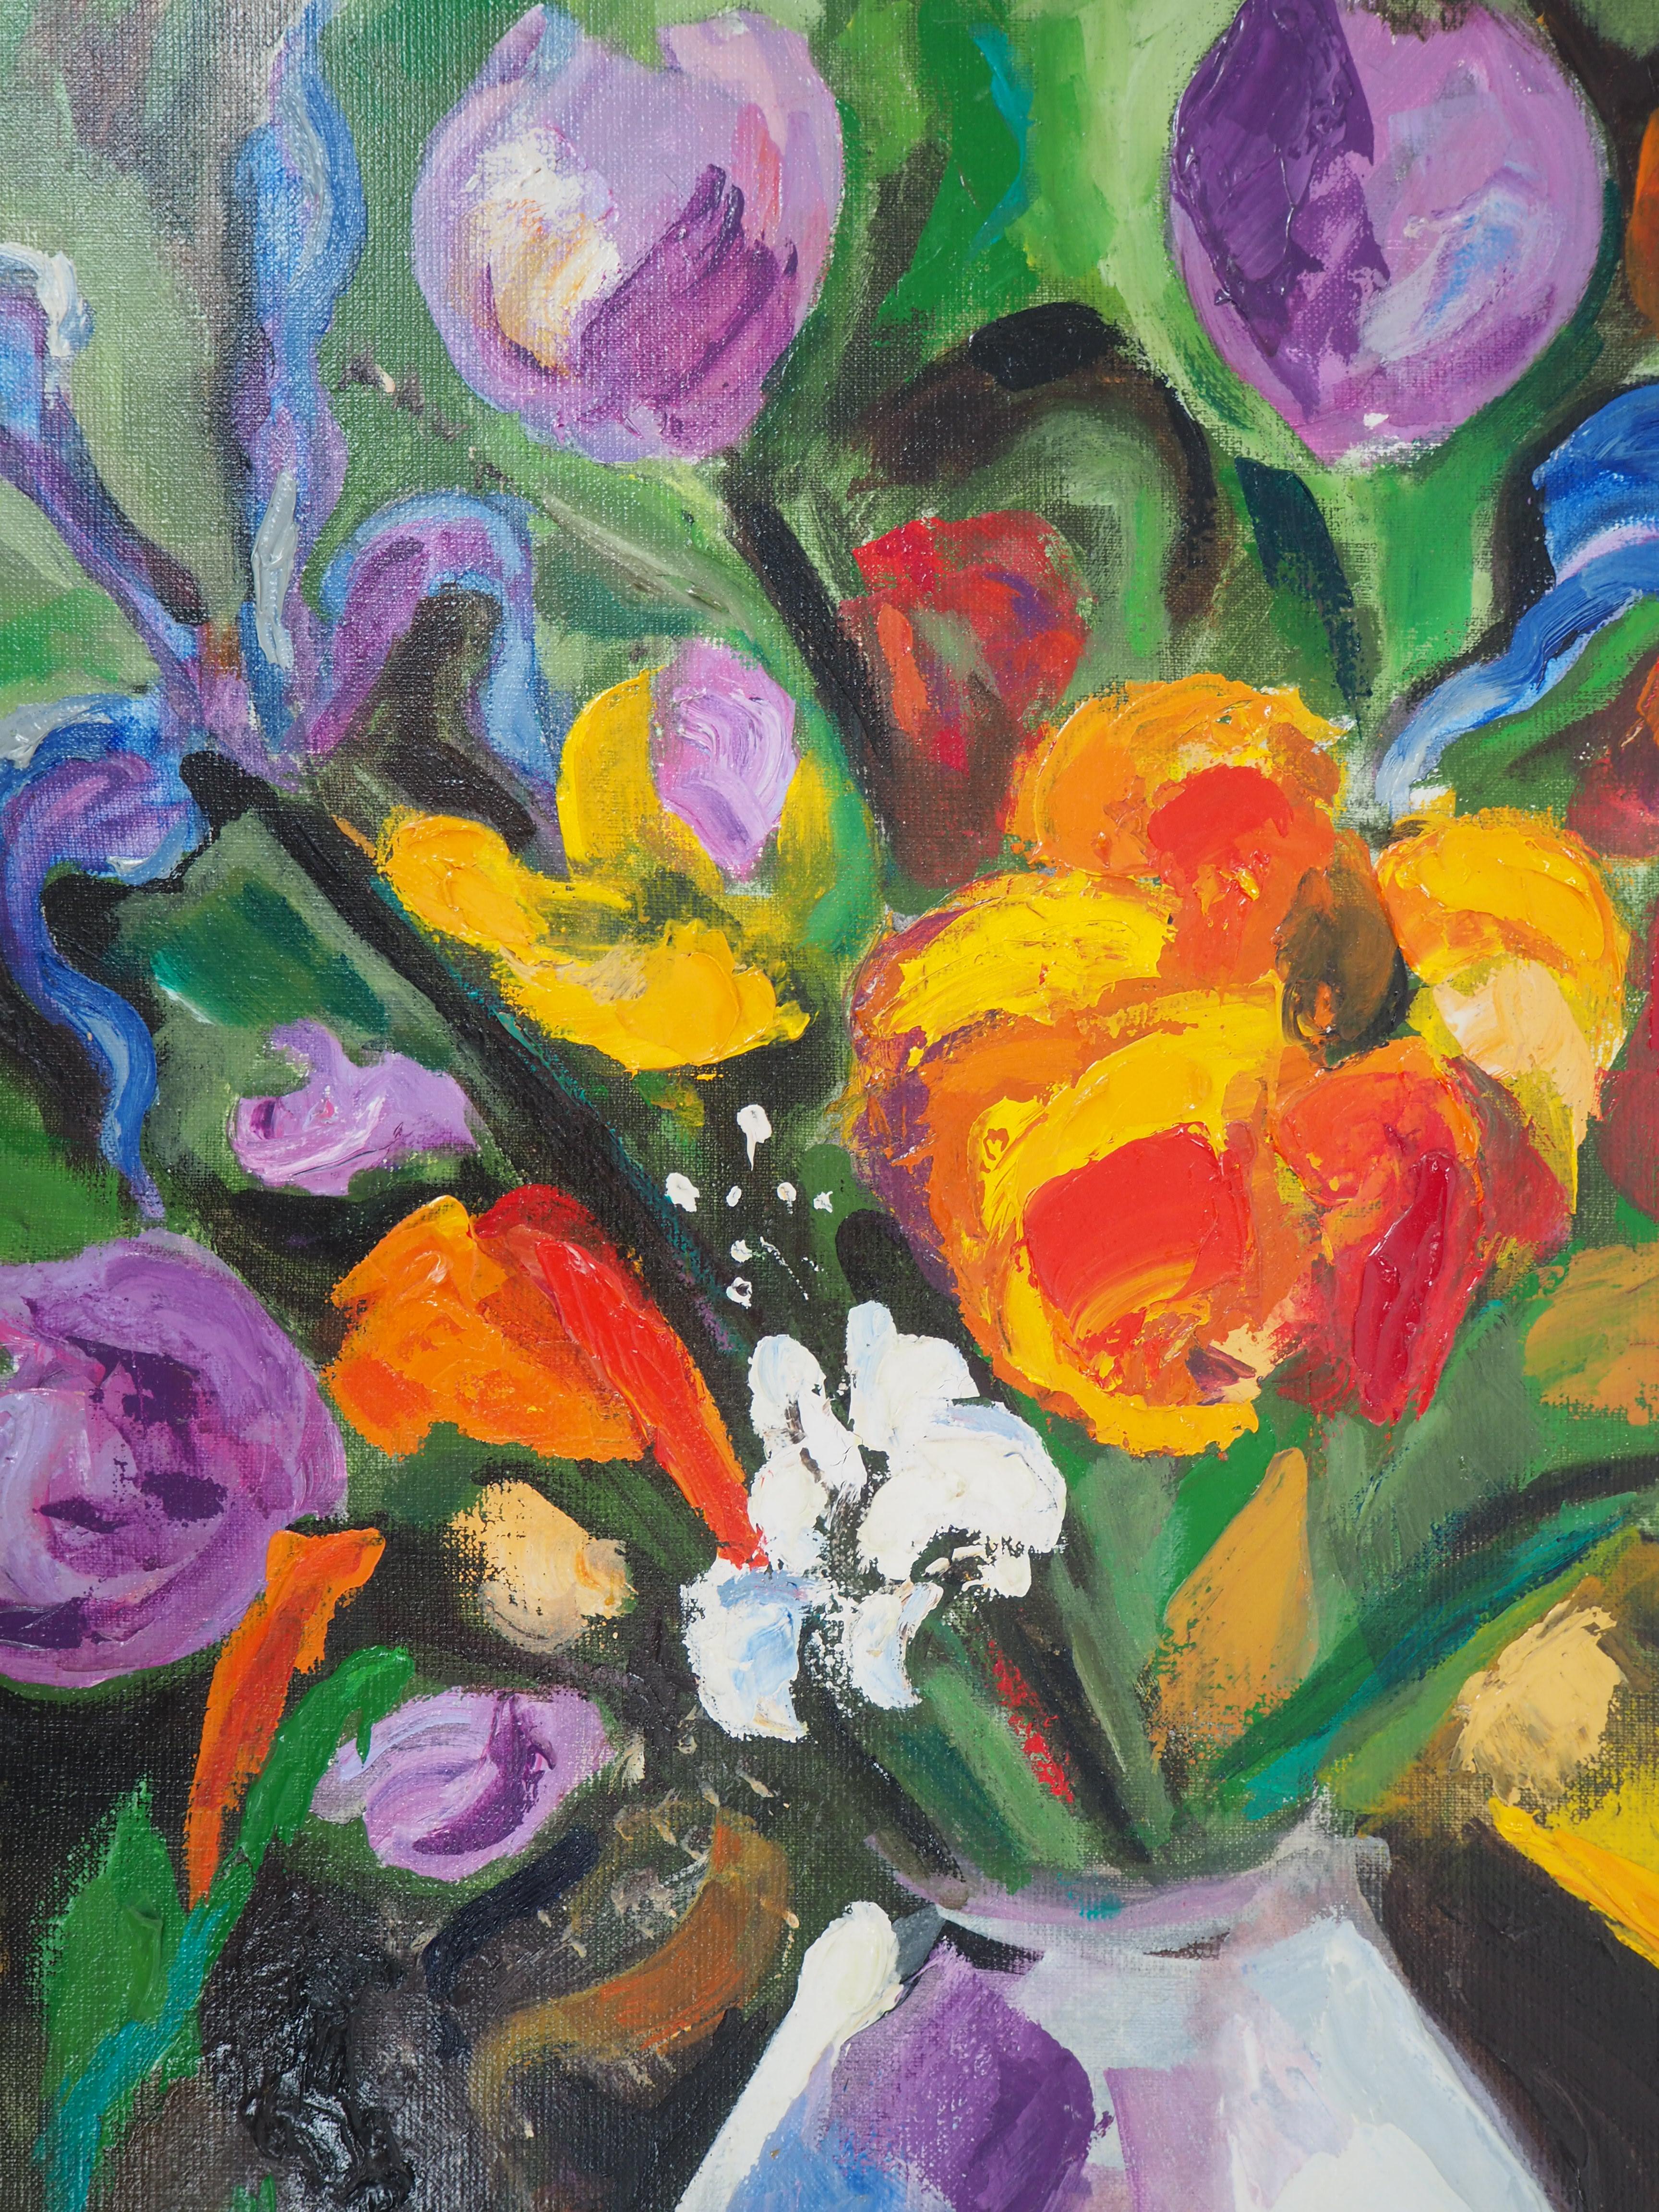 Pascal AMBROGIANI
Bouquet of Tulips and Wild Flowers

Original oil on canvas
Signed on the lower left corner
Signed and artist workshop stamp on the back
On canvas 65 x 54 cm (c. 26  x 22 in)

Excellent condition